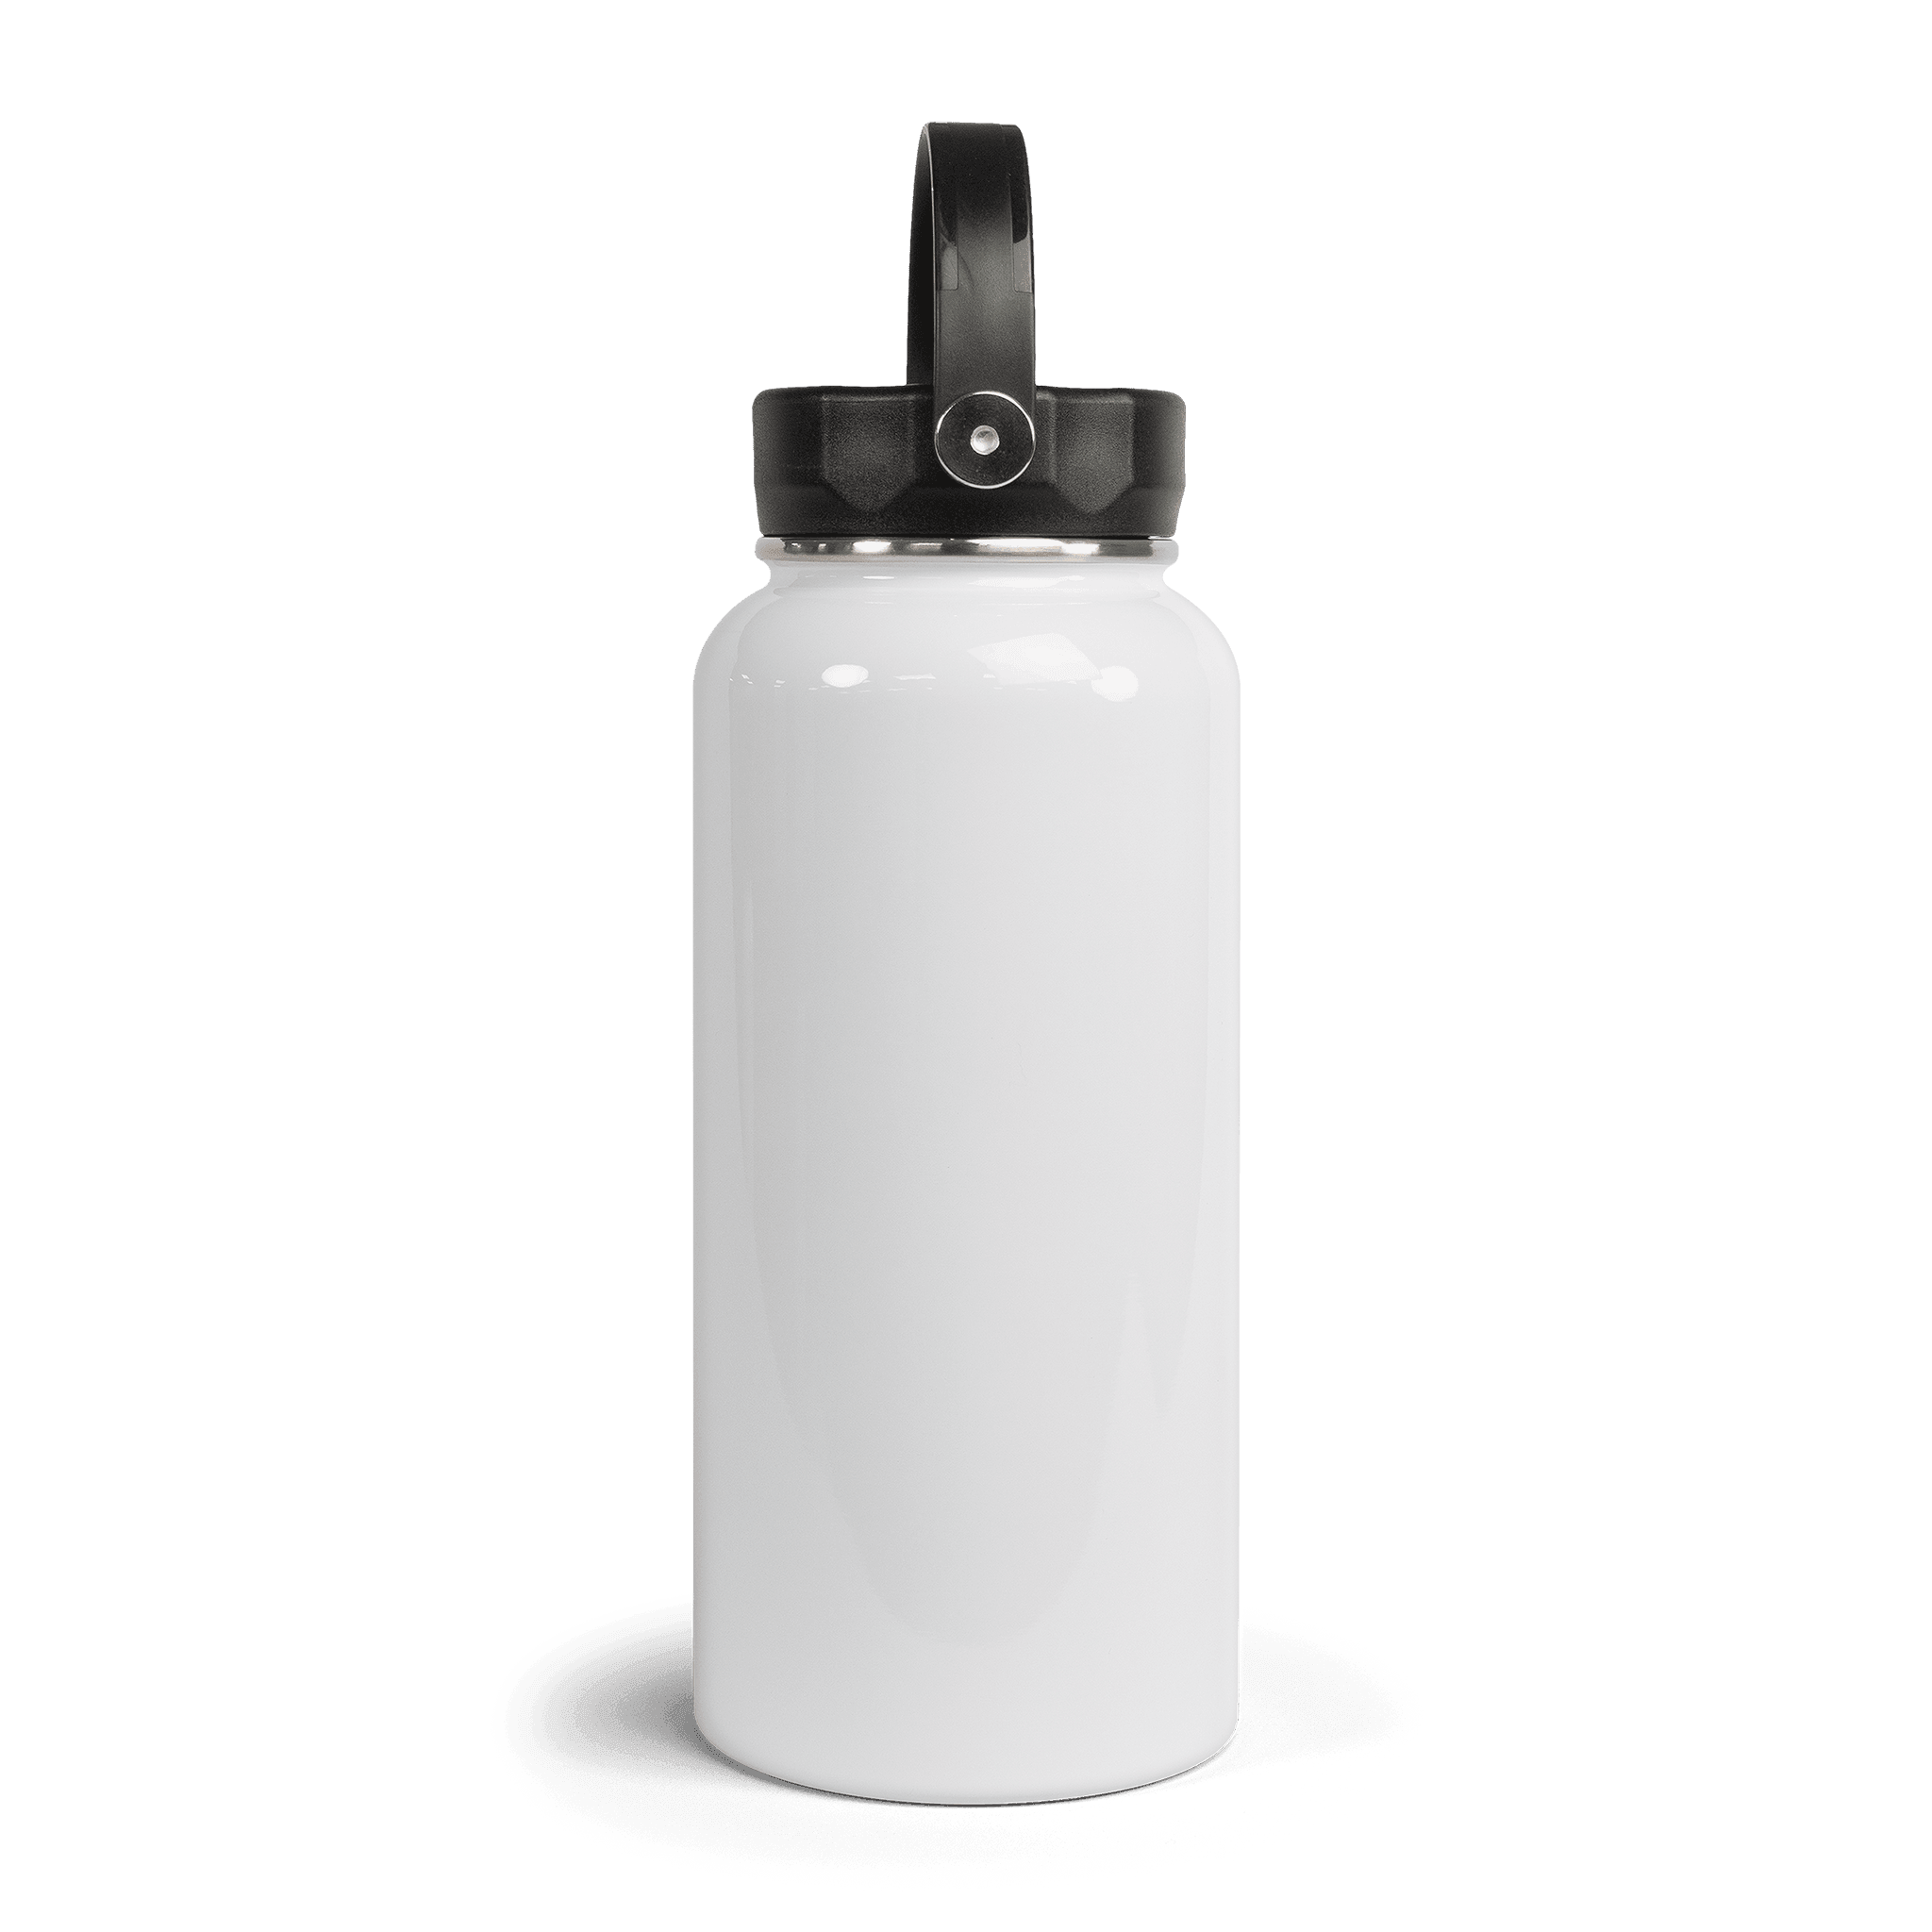 12 Oz Sublimation Blank Water Bottle Stainless Steel Double Walled